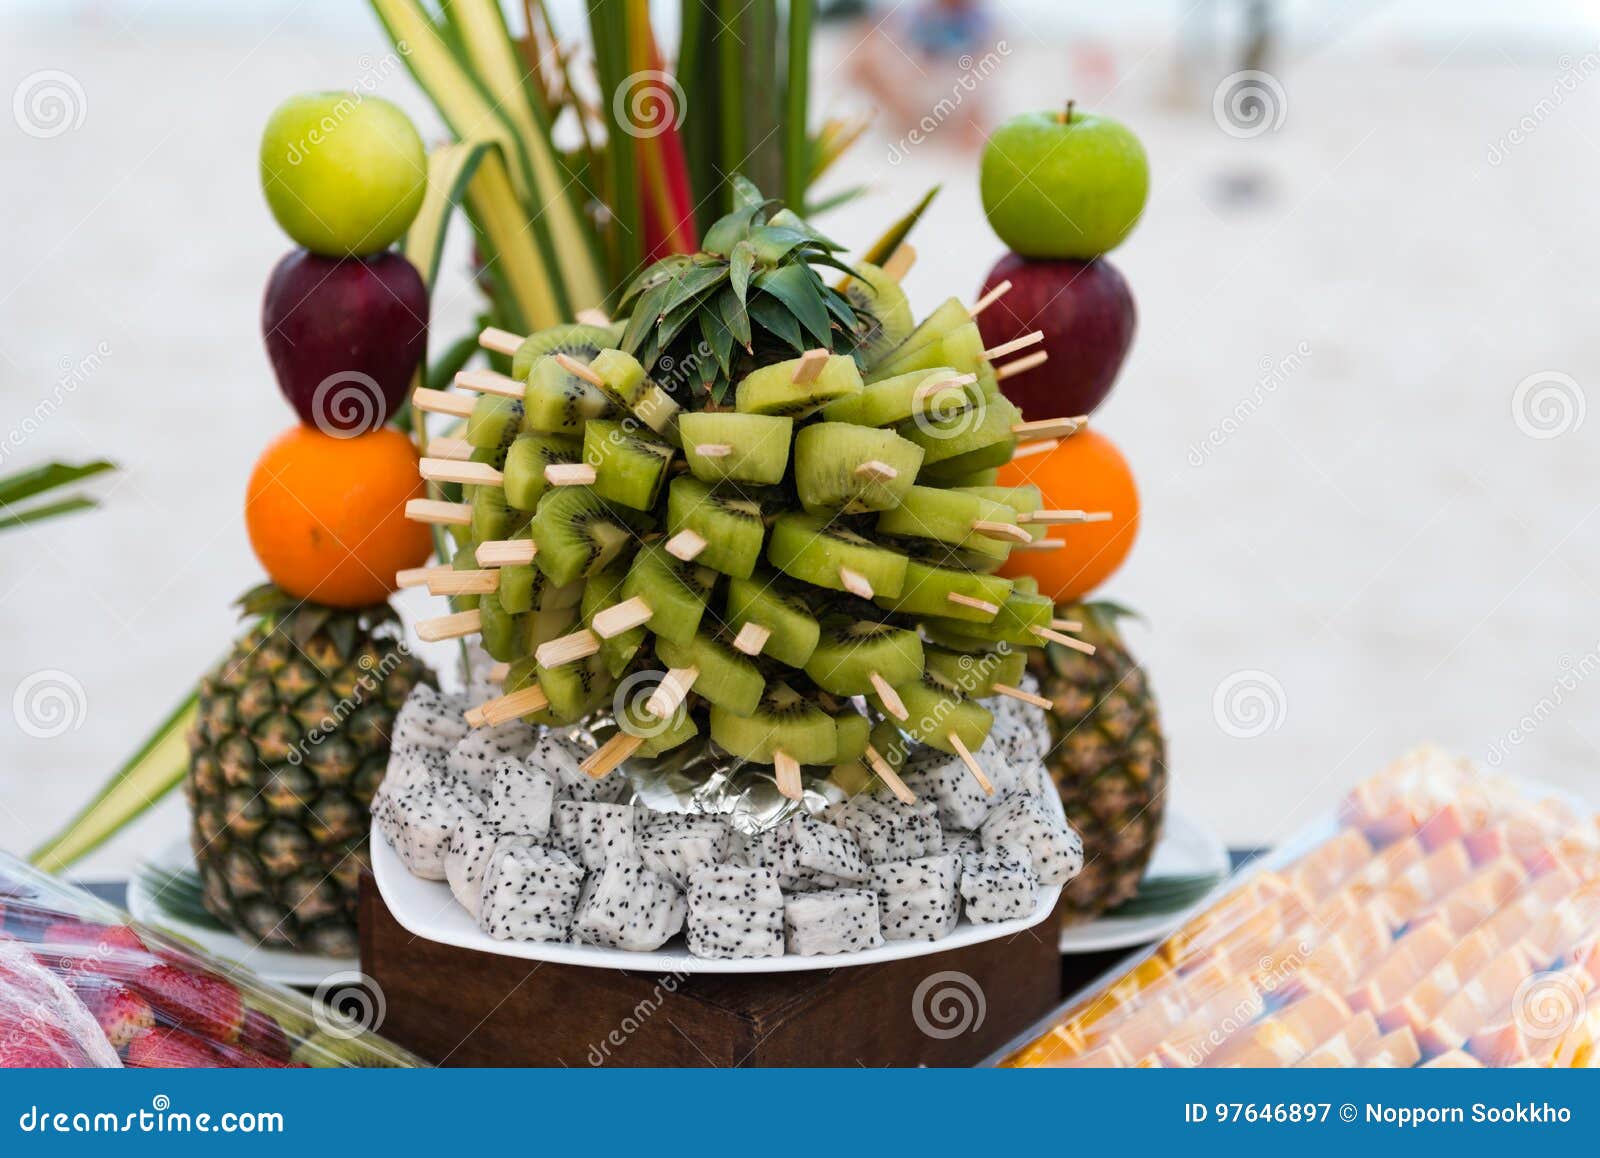 Fruit Decoration For Dinner Party Stock Image Image Of